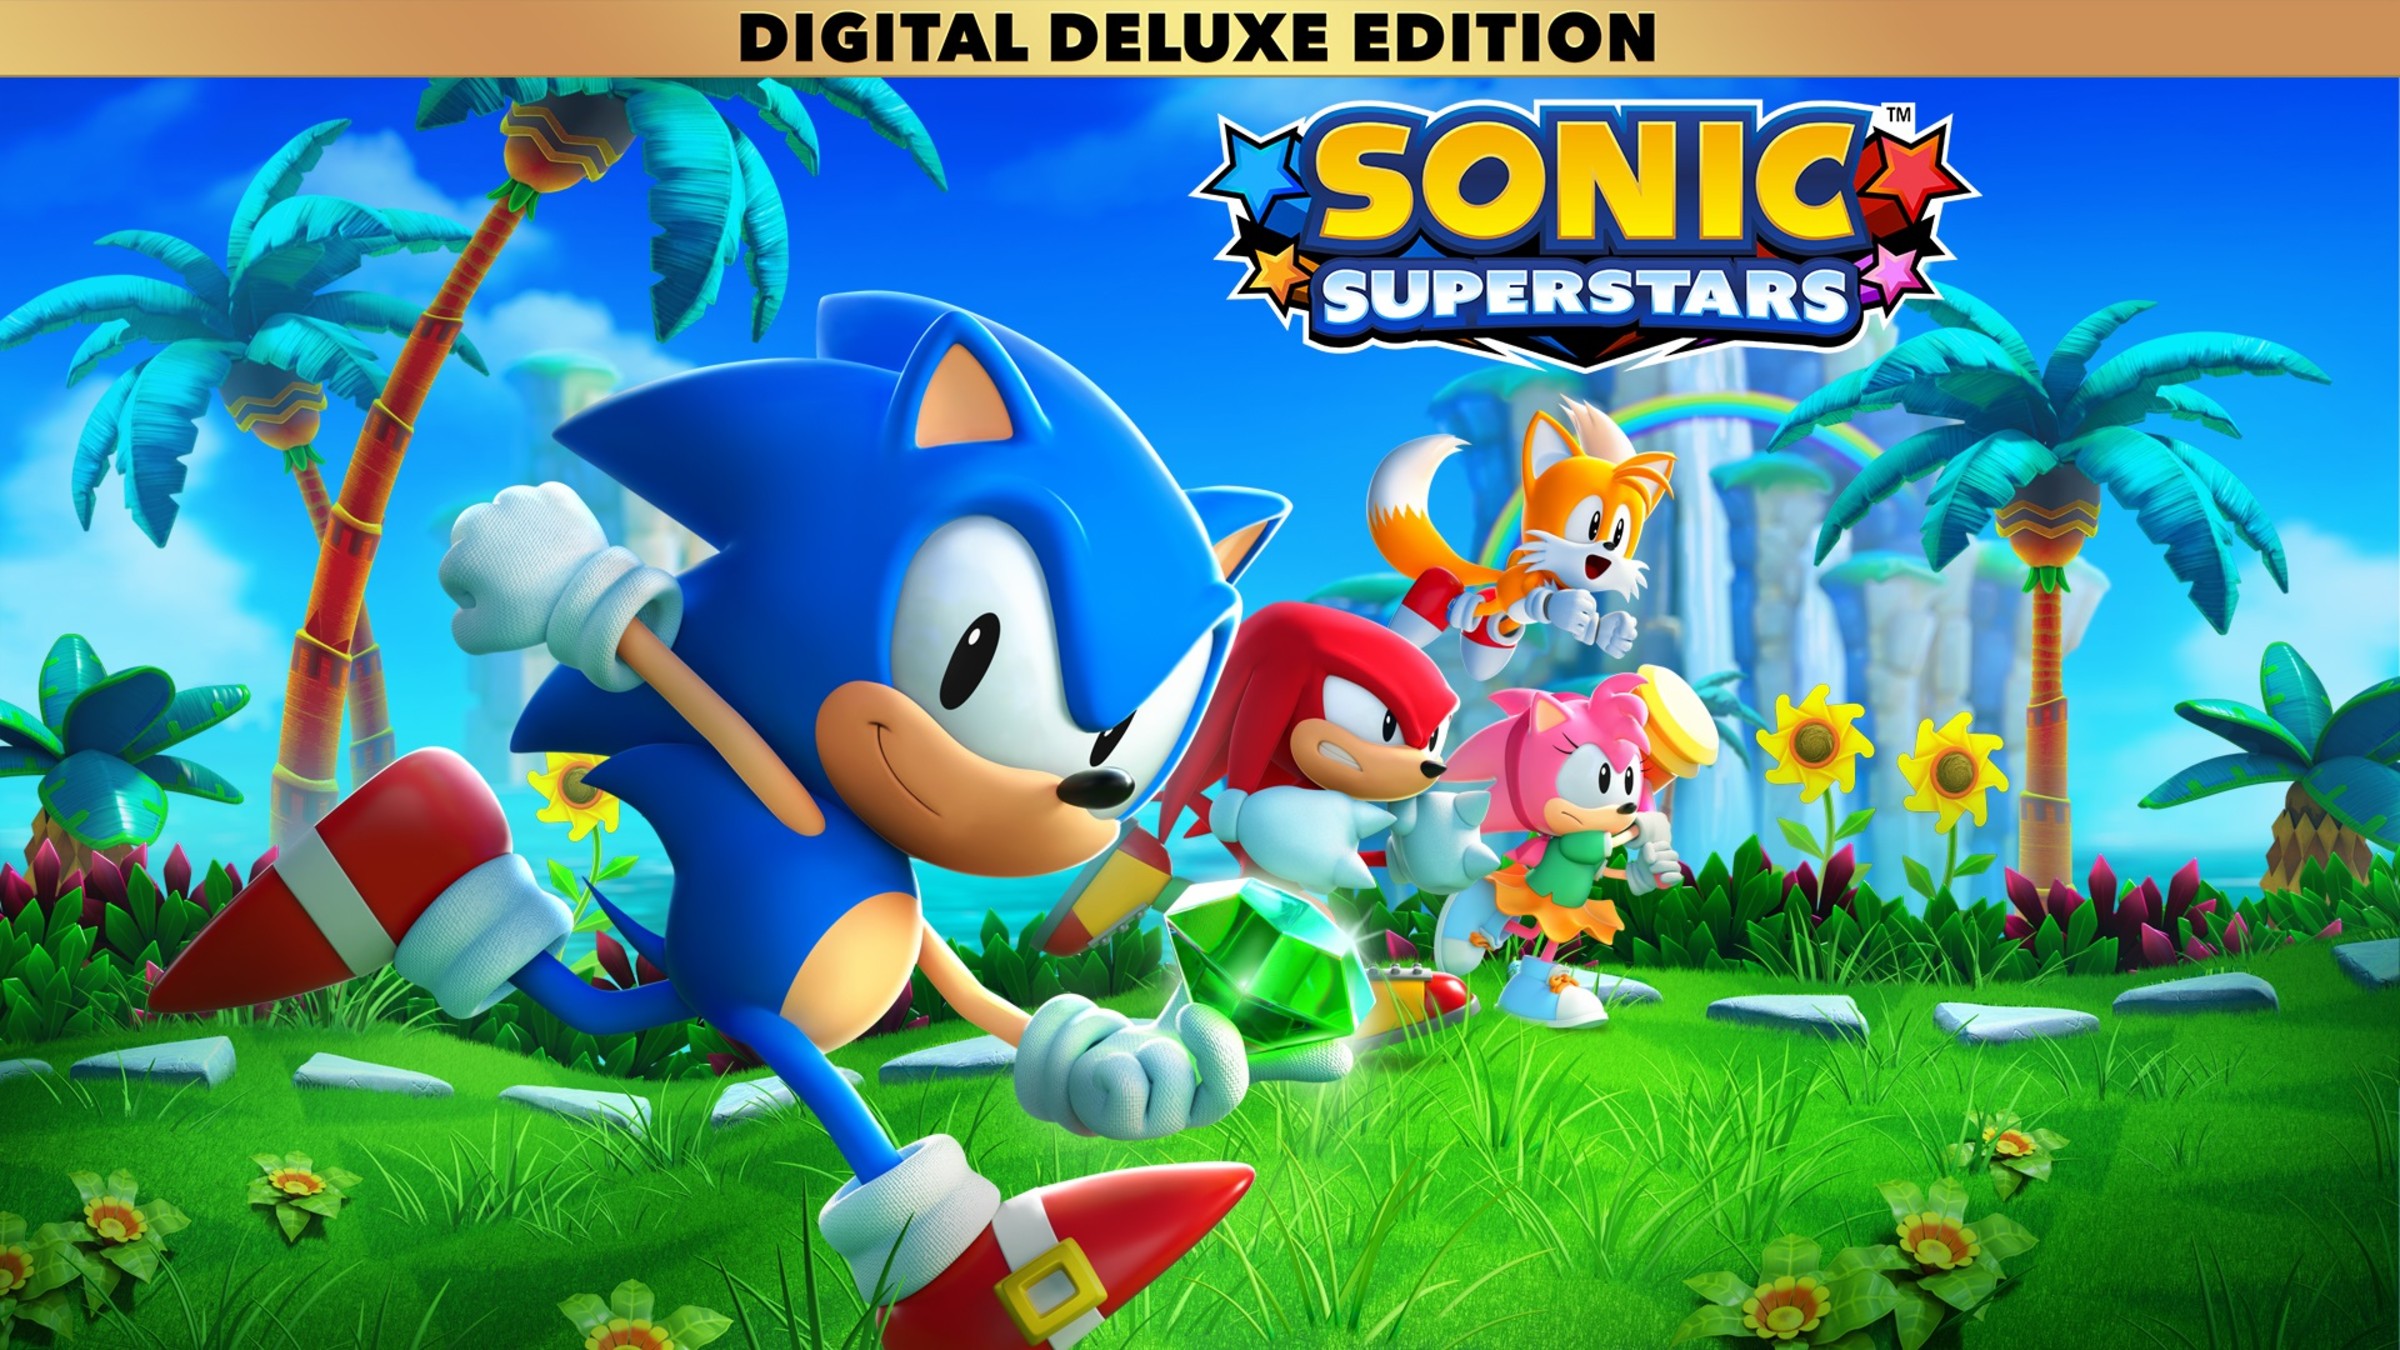 Pre-Order Sonic Superstars now for an exclusive Lego Dr. Eggman